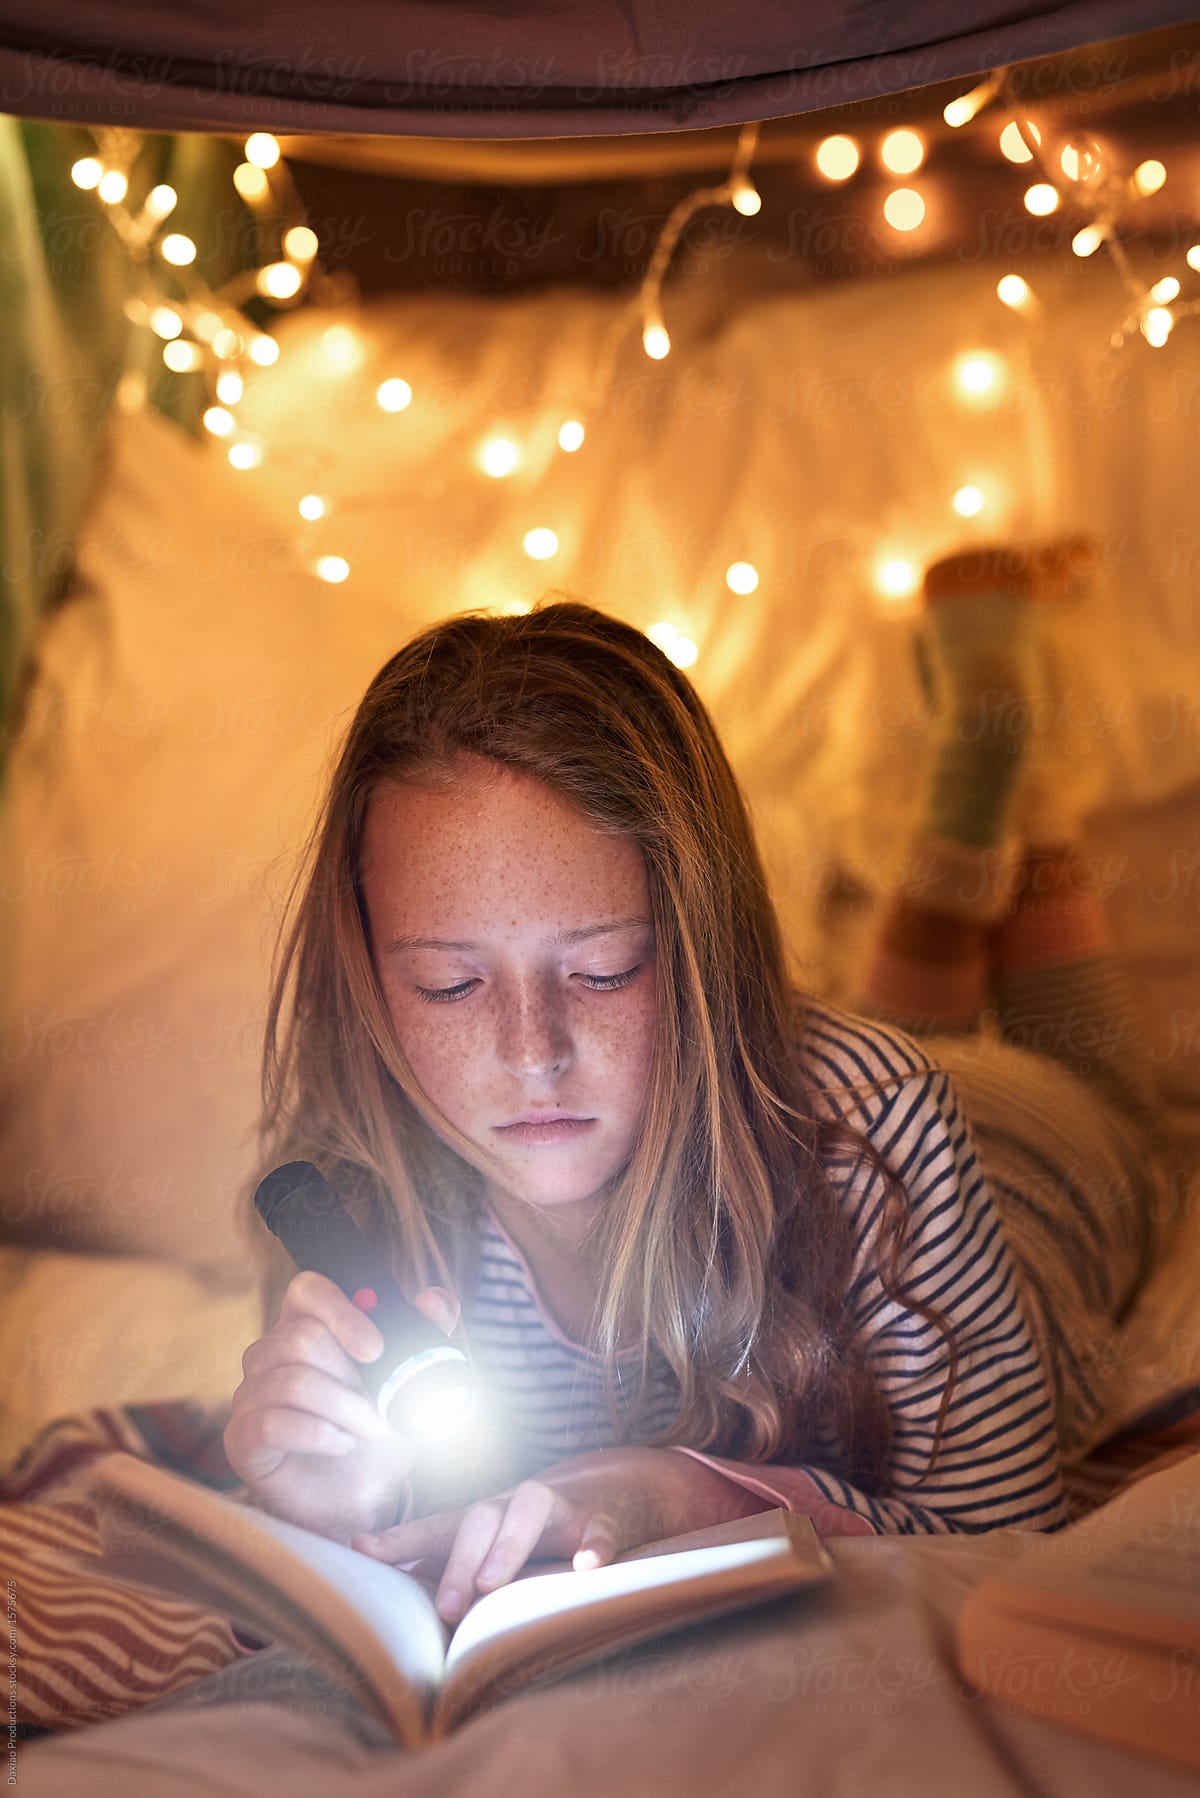 Young girl reading in blanket fort